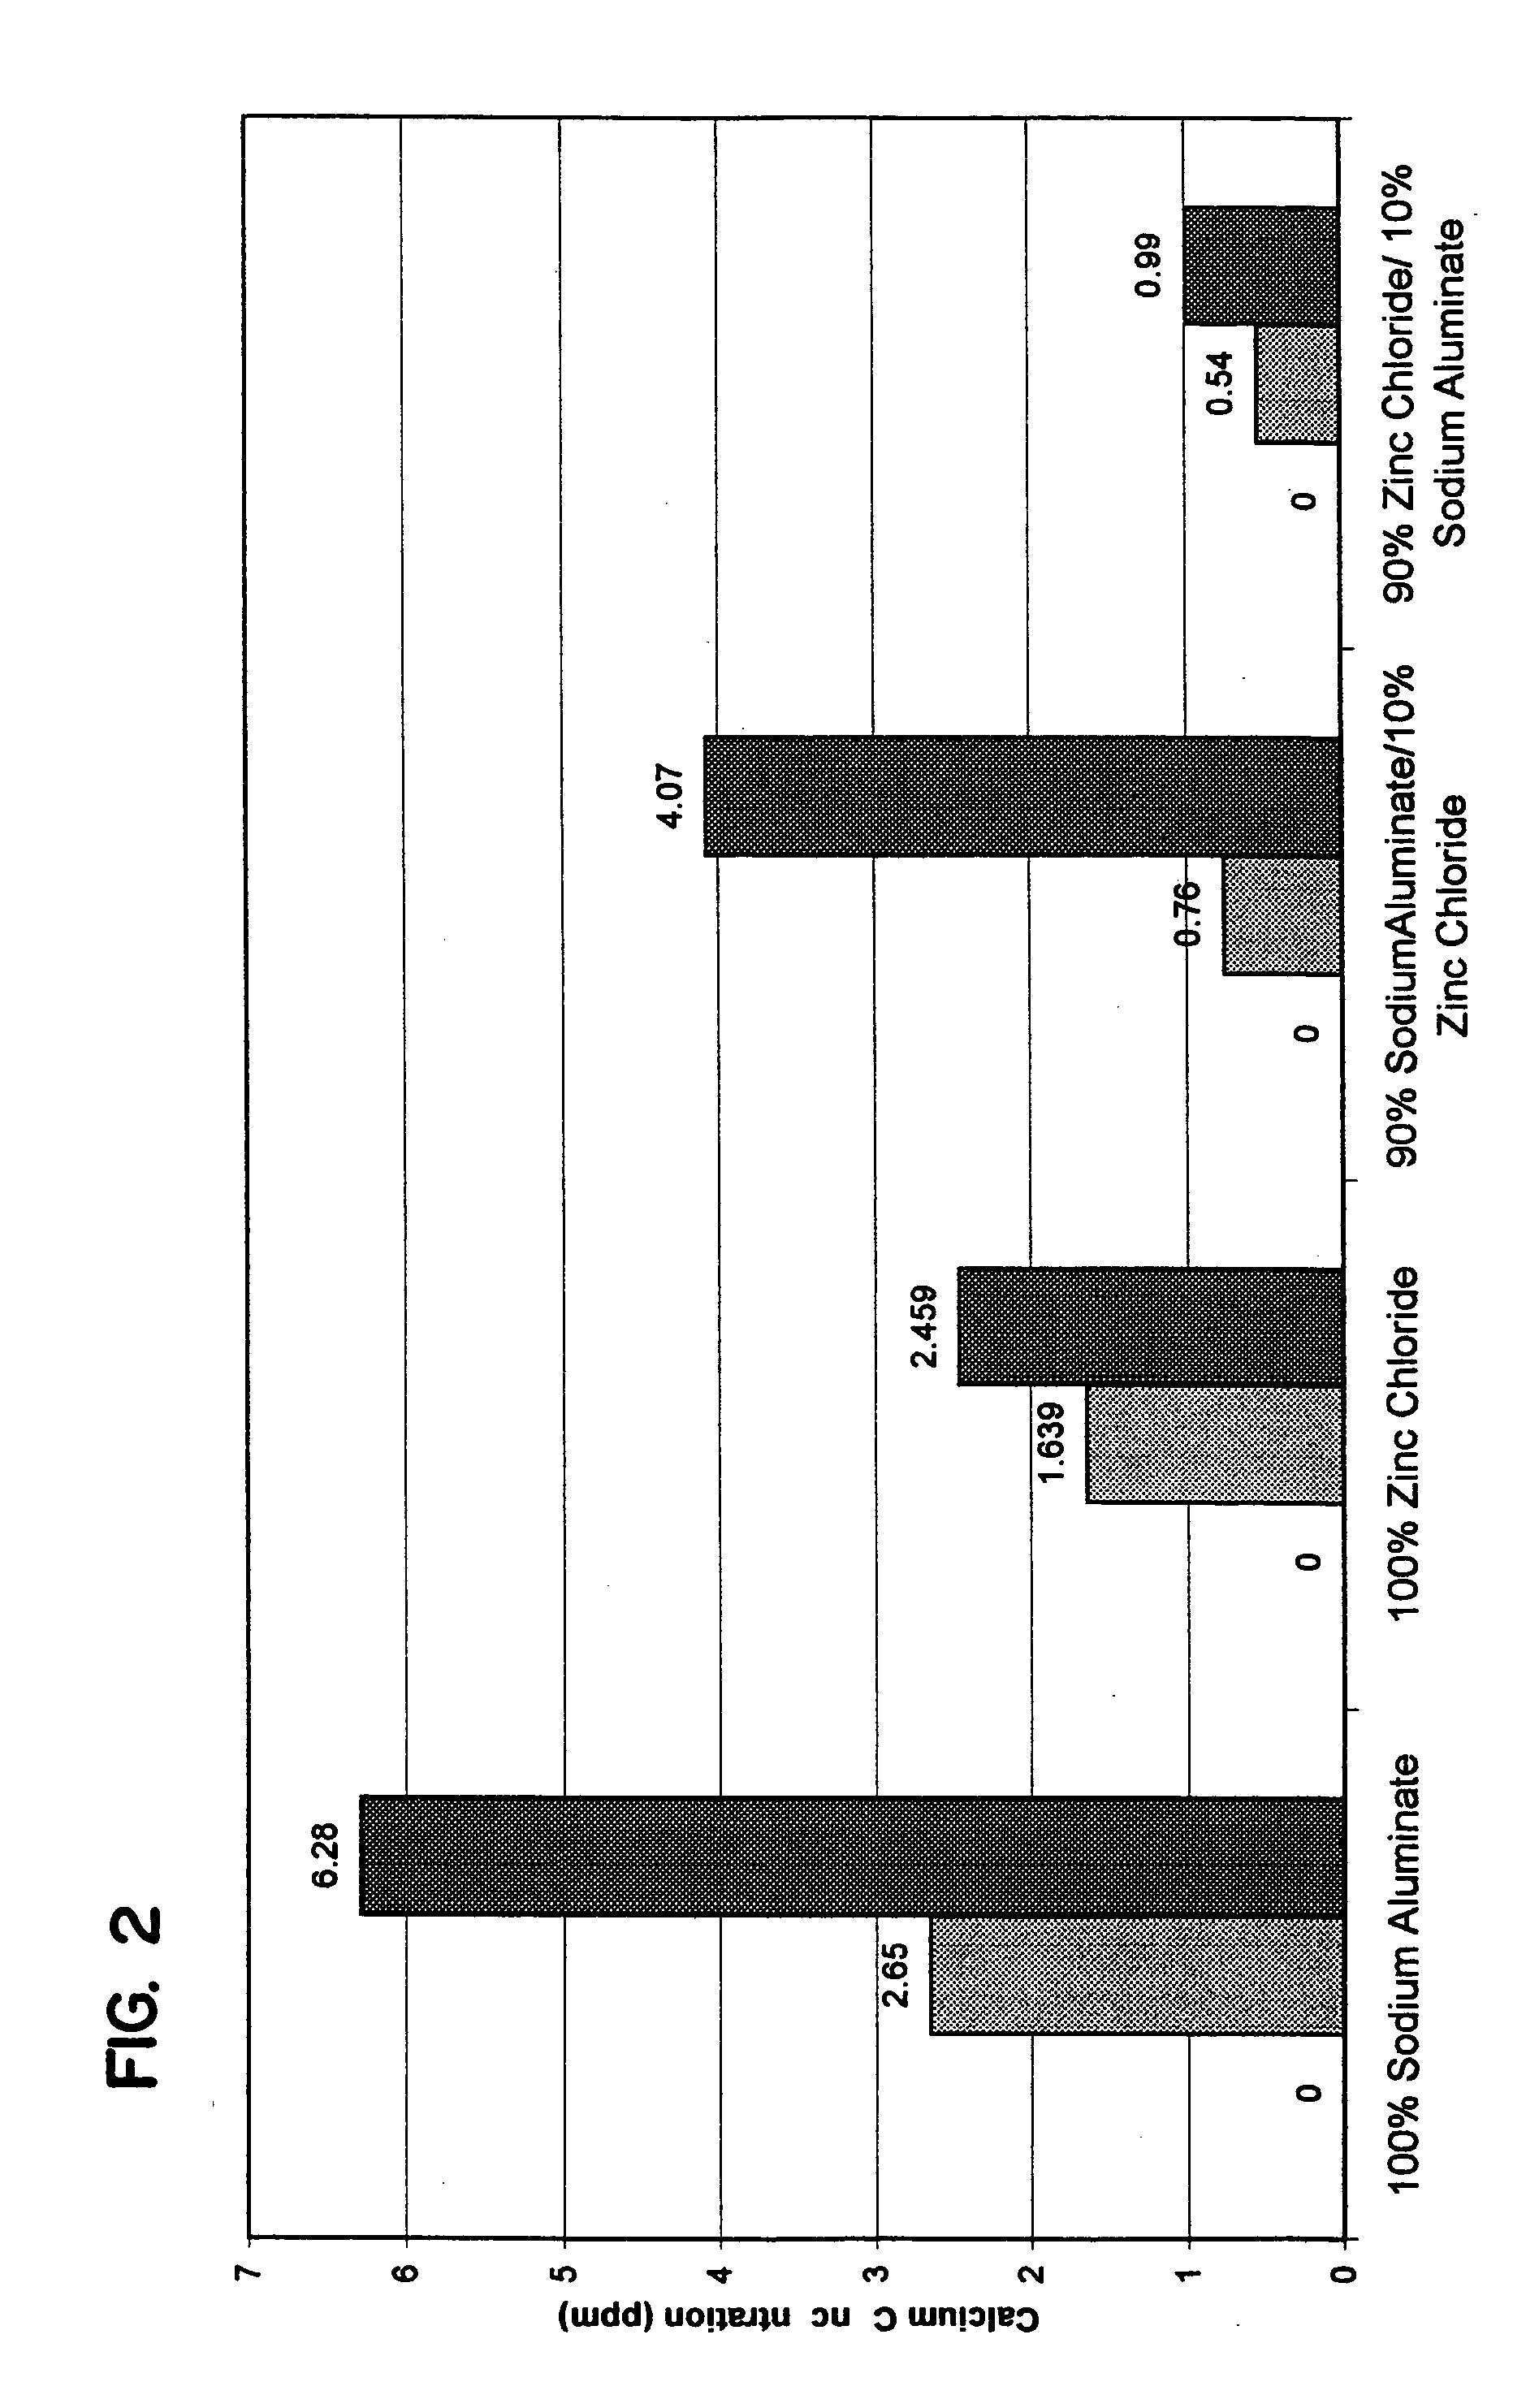 Warewashing composition for use in automatic dishwashing machines, comprising a mixture of aluminum and zinc ions